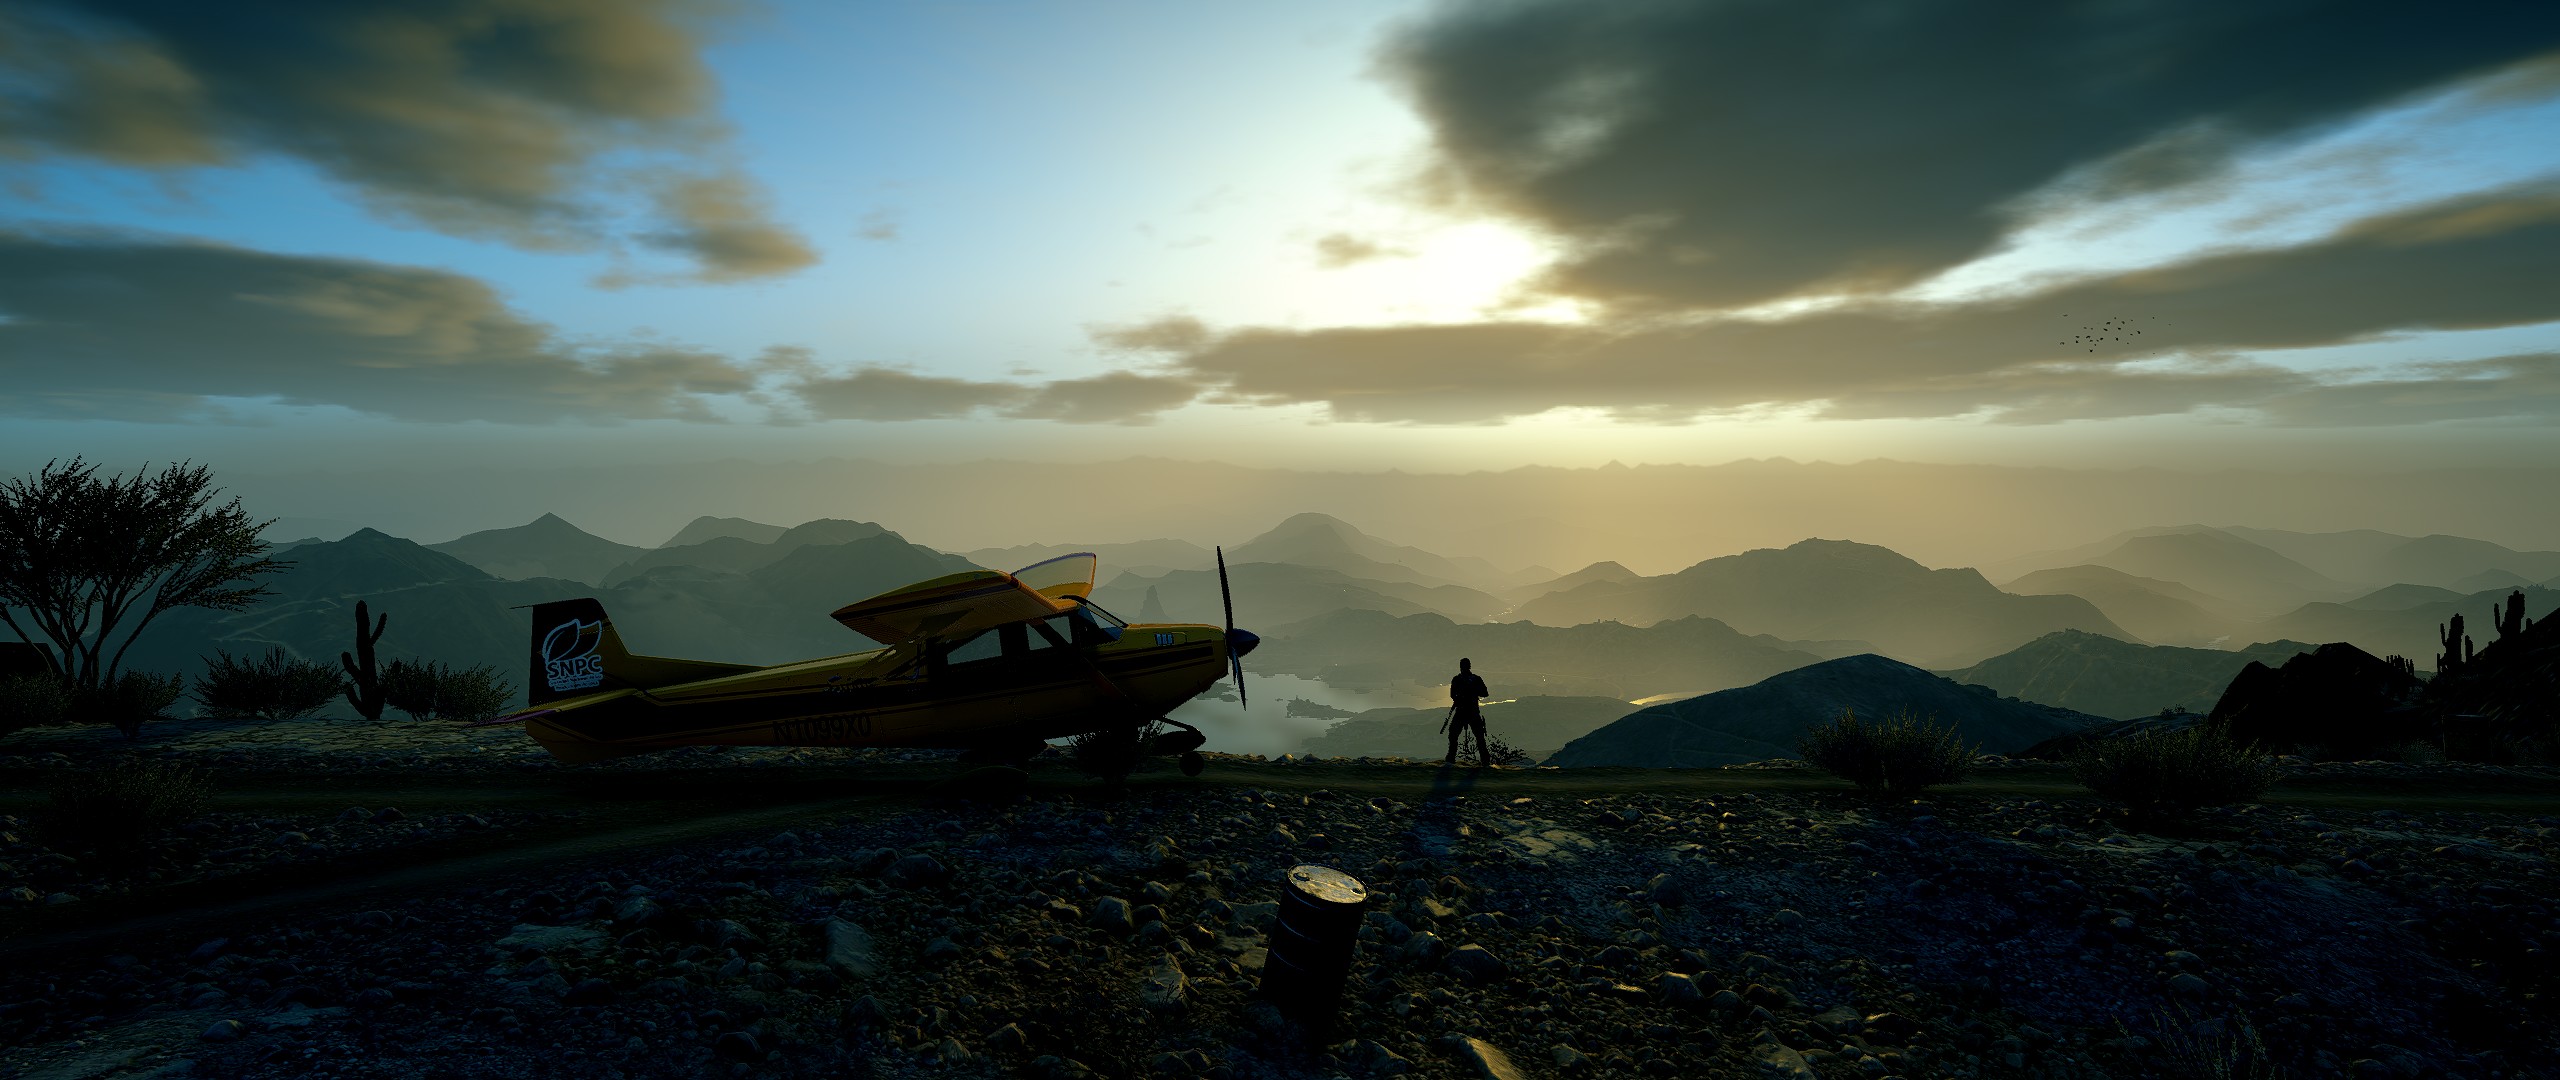 General 2560x1080 Tom Clancy's Ghost Recon Ghost Recon Wildlands wide screen PC gaming